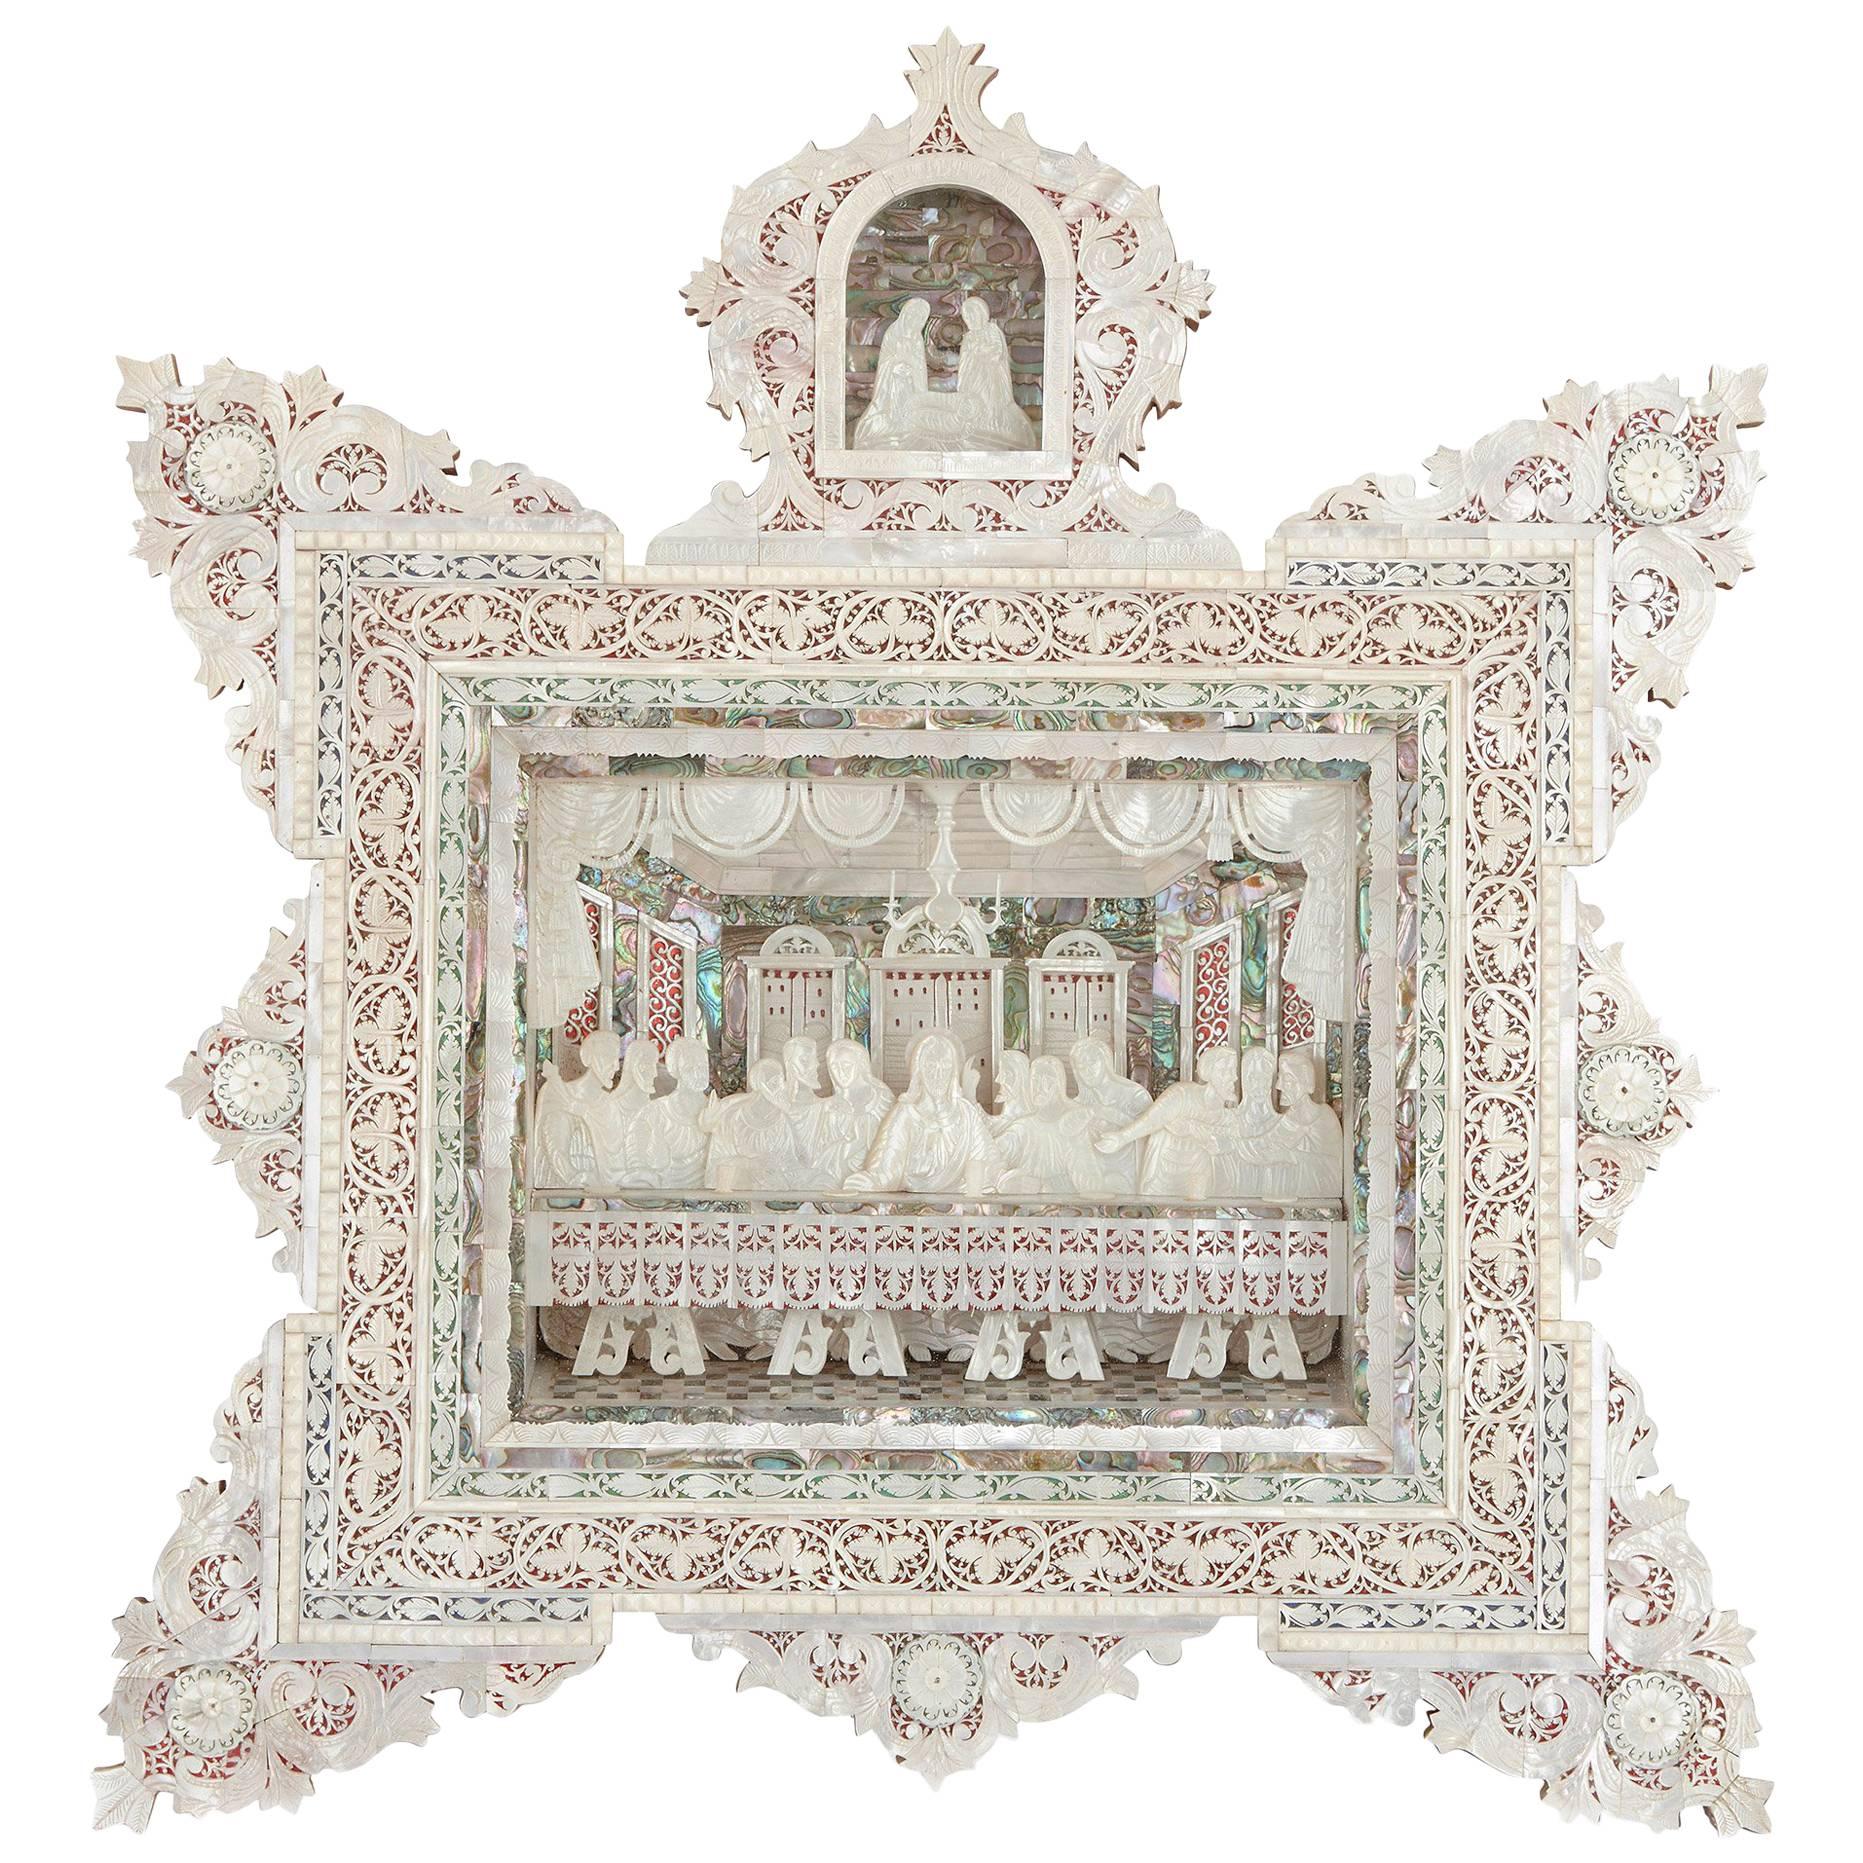 Antique Mother-of-Pearl Christian Icon of the Last Supper from Jerusalem